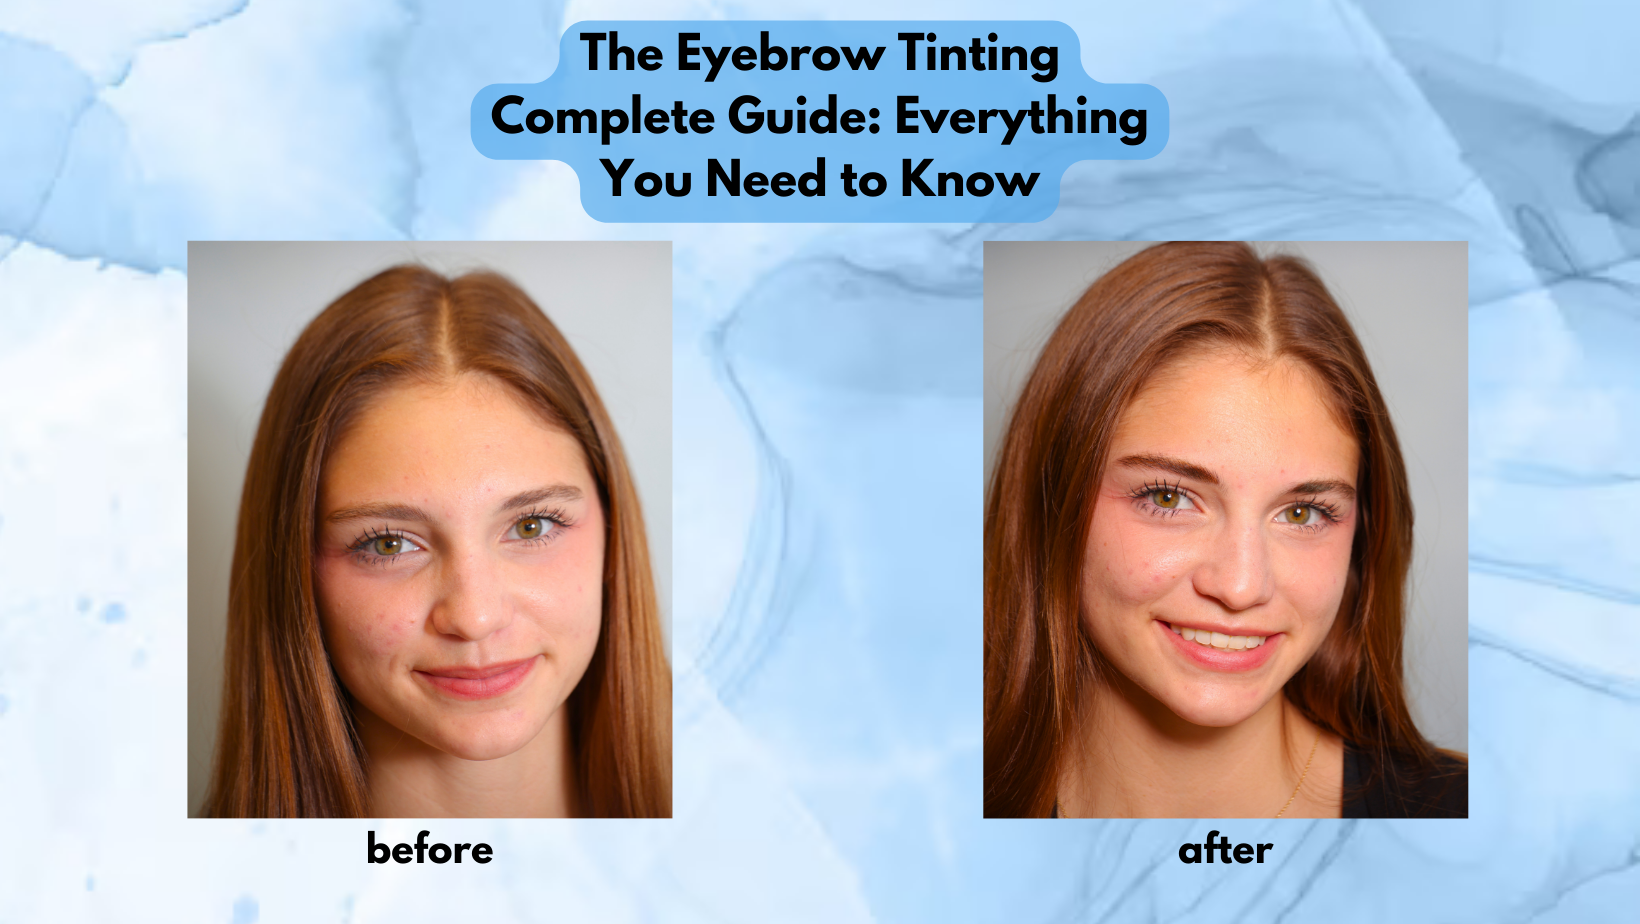 The Eyebrow Tinting Complete Guide: Everything You Need to Know